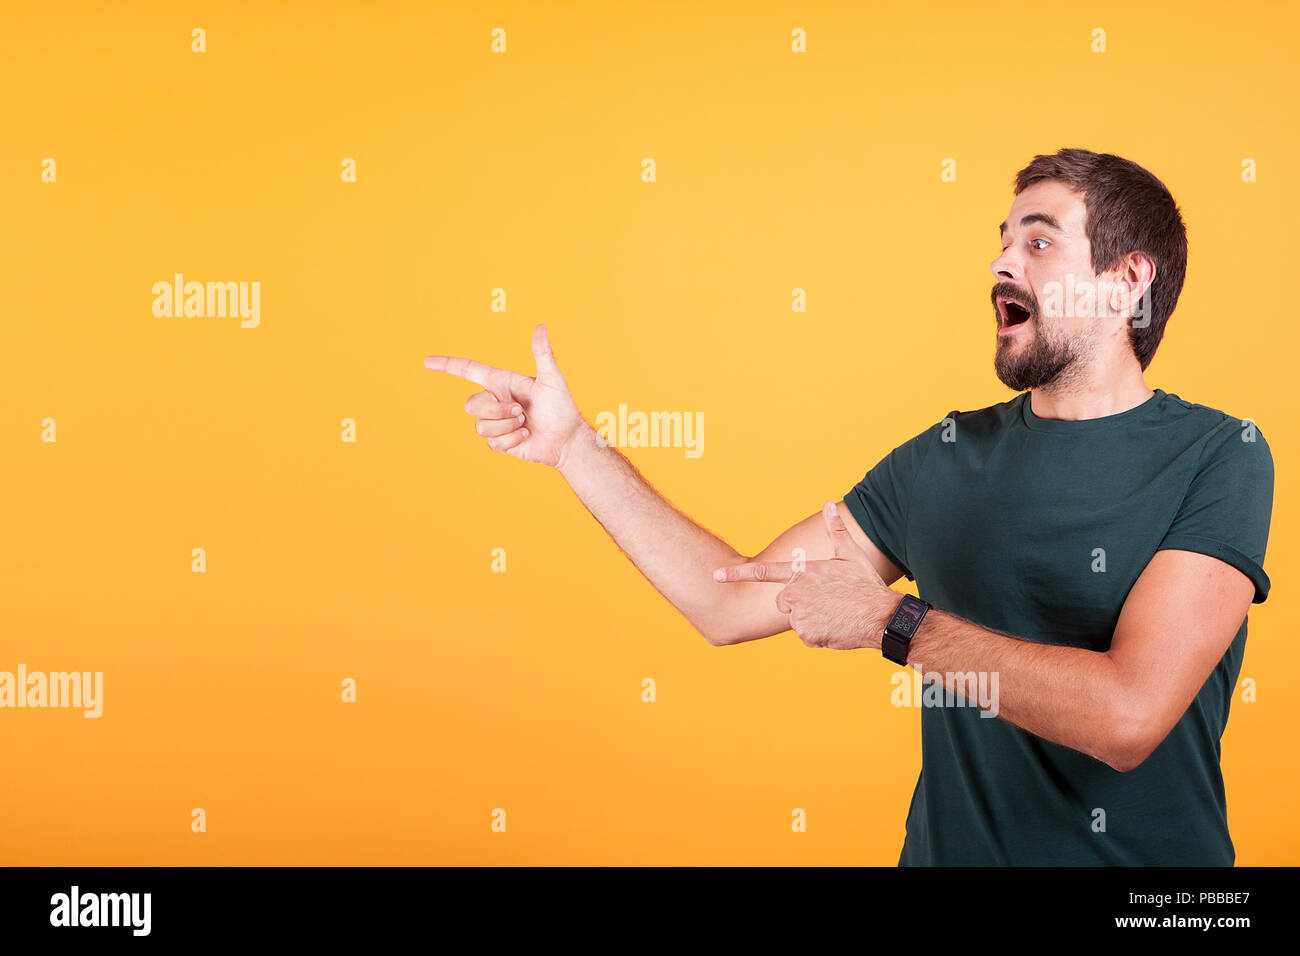 Enthusiasm and expressive man pointing at the copyspace available for your text, promo or advertising. The male is surprised and happy. Orange background Stock Photo